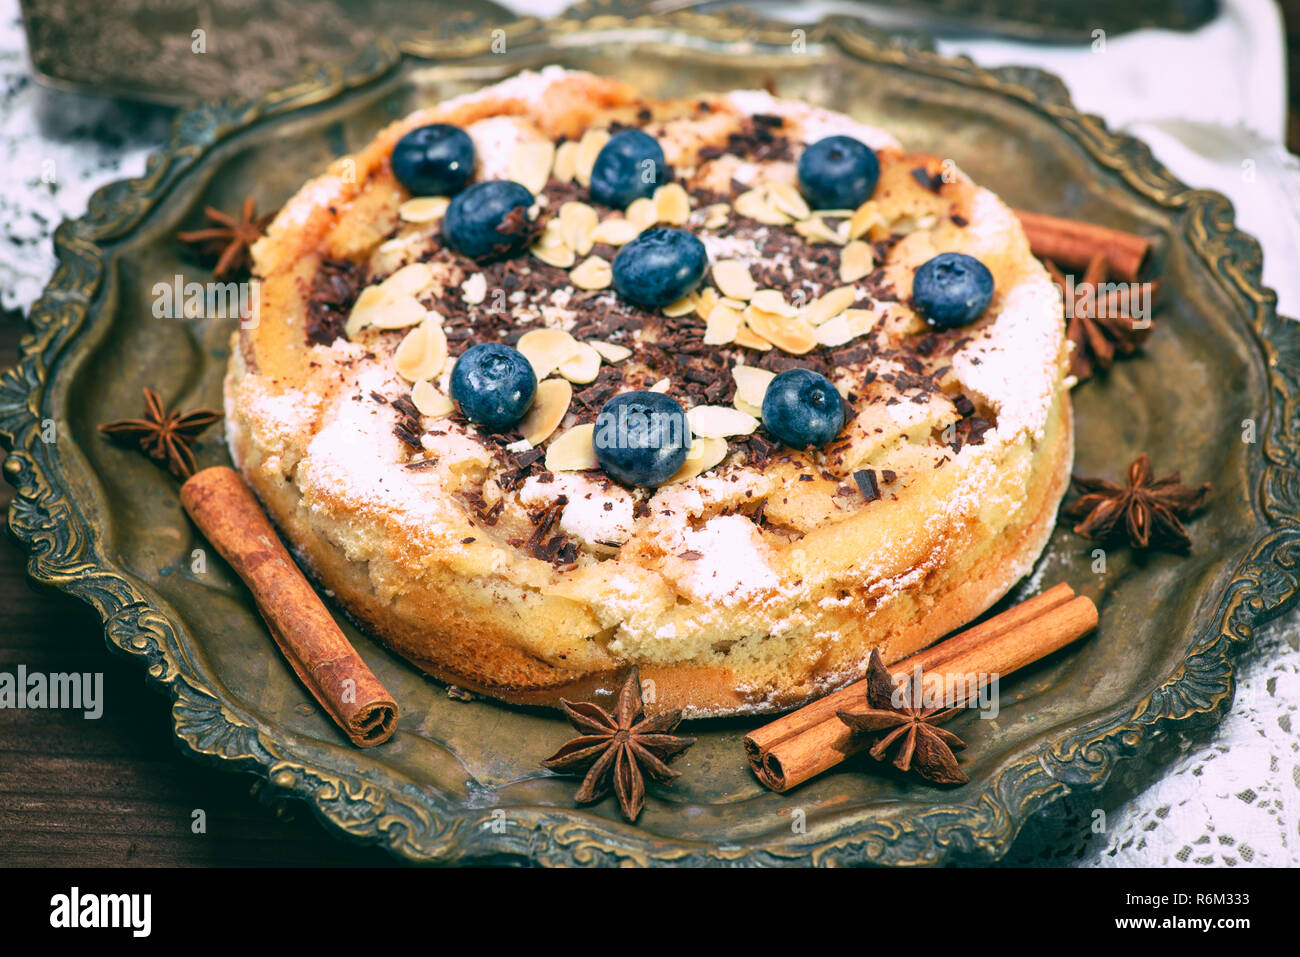 baked round cake with blueberry berries on a copper plate Stock Photo